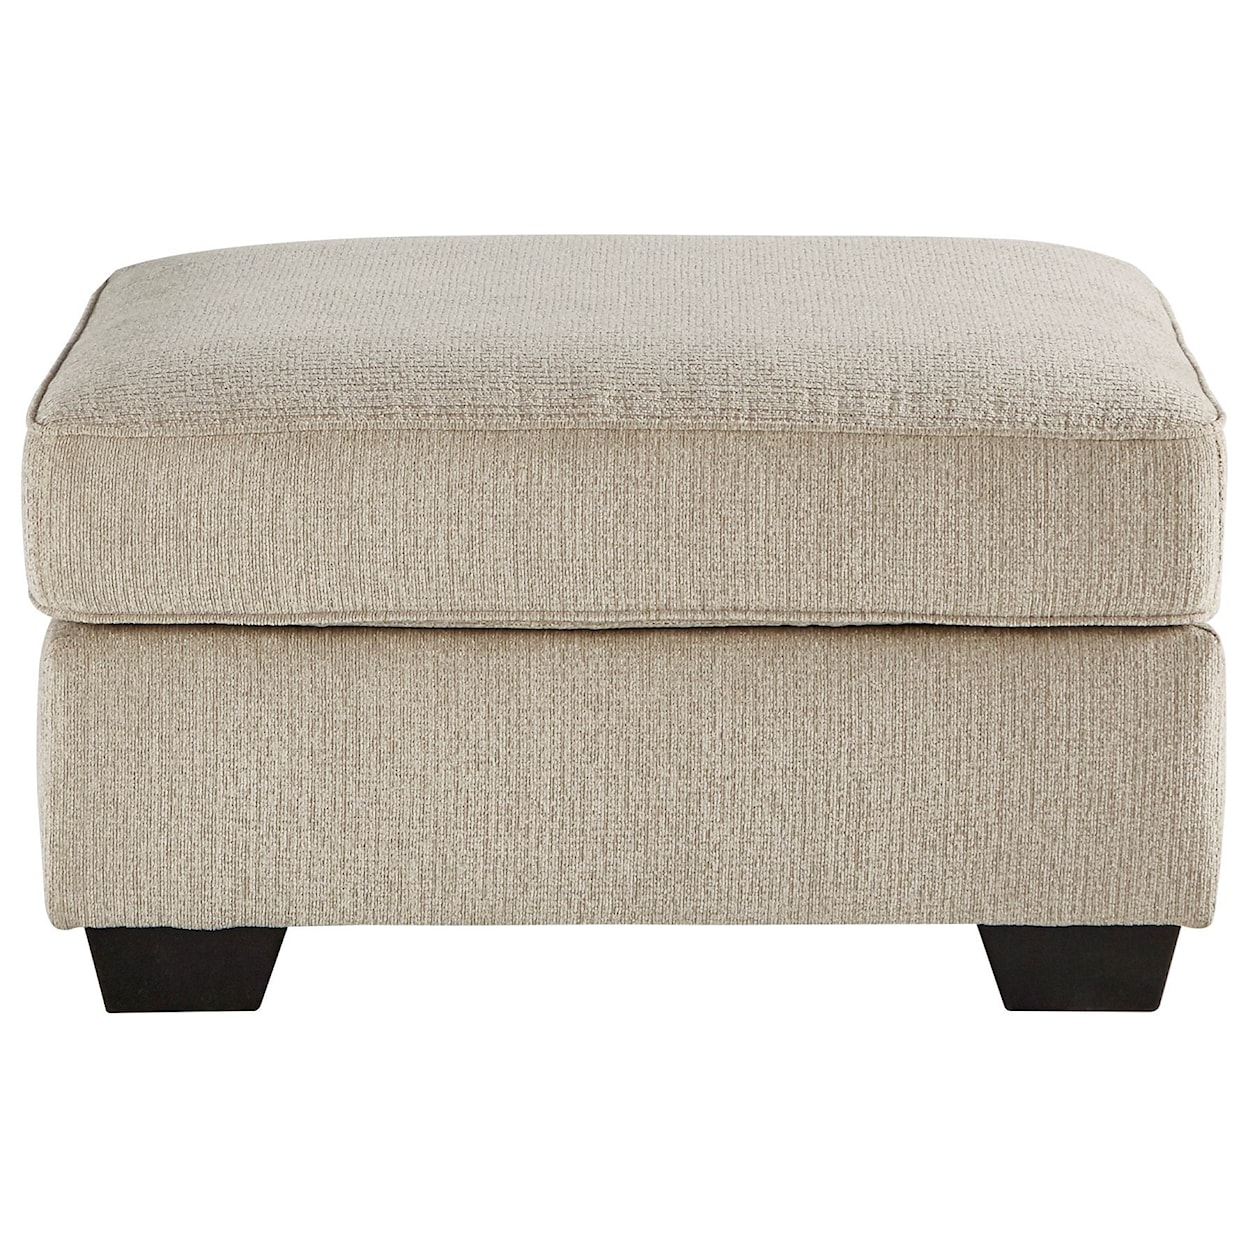 Signature Design by Ashley Decelle Oversized Accent Ottoman